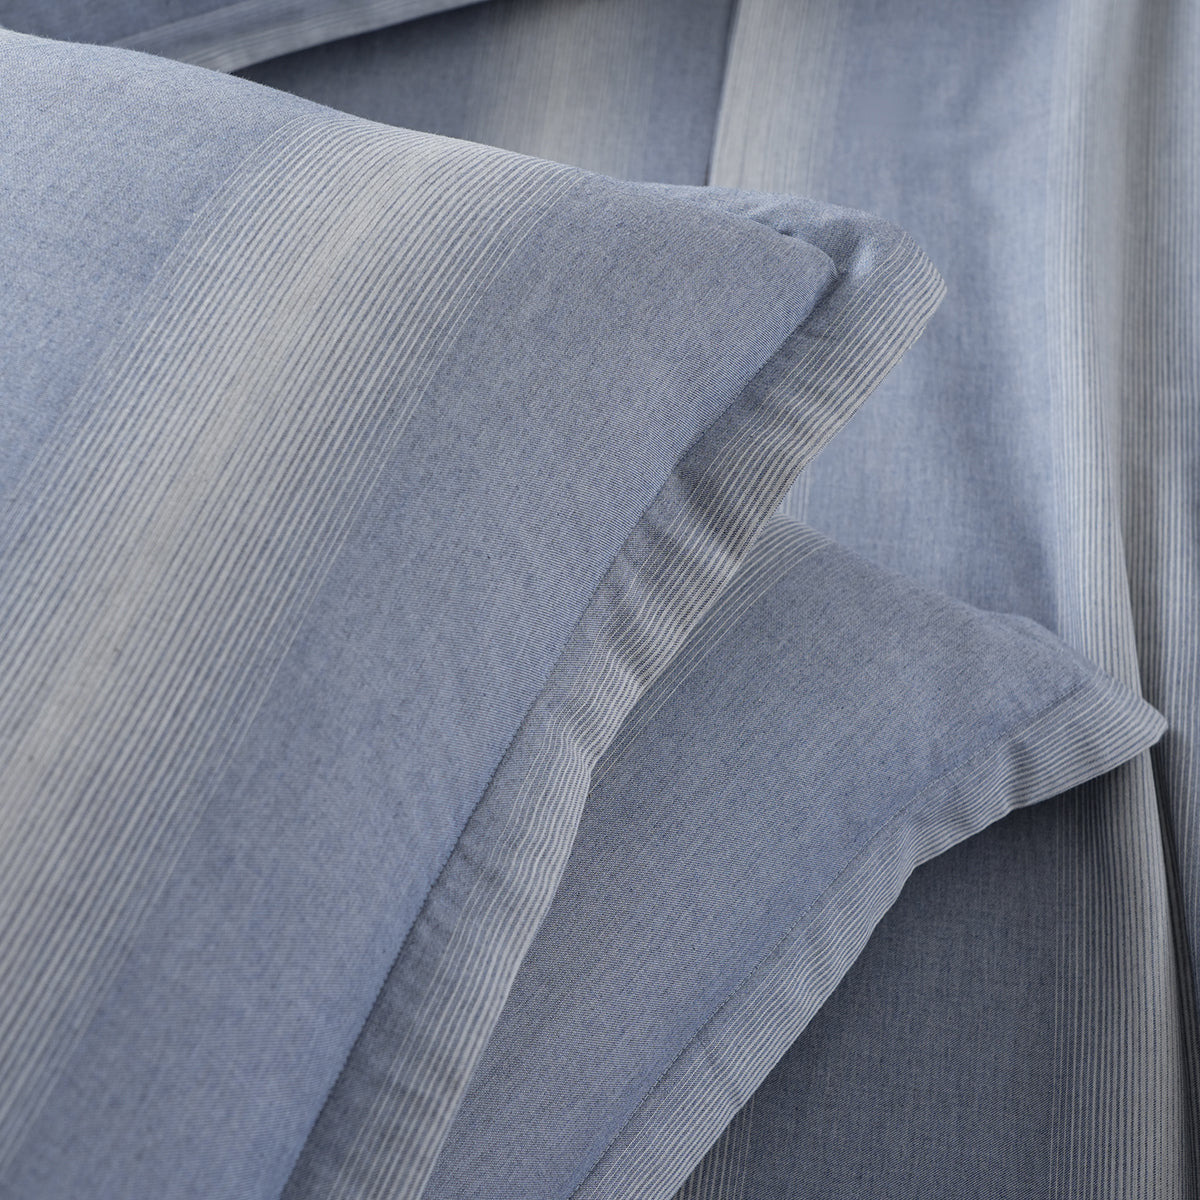 Rhythmic Stripe Reversible Made With Egyptian Cotton Ultra Soft Classic Blue/Grey Marble Bed Sheet Set